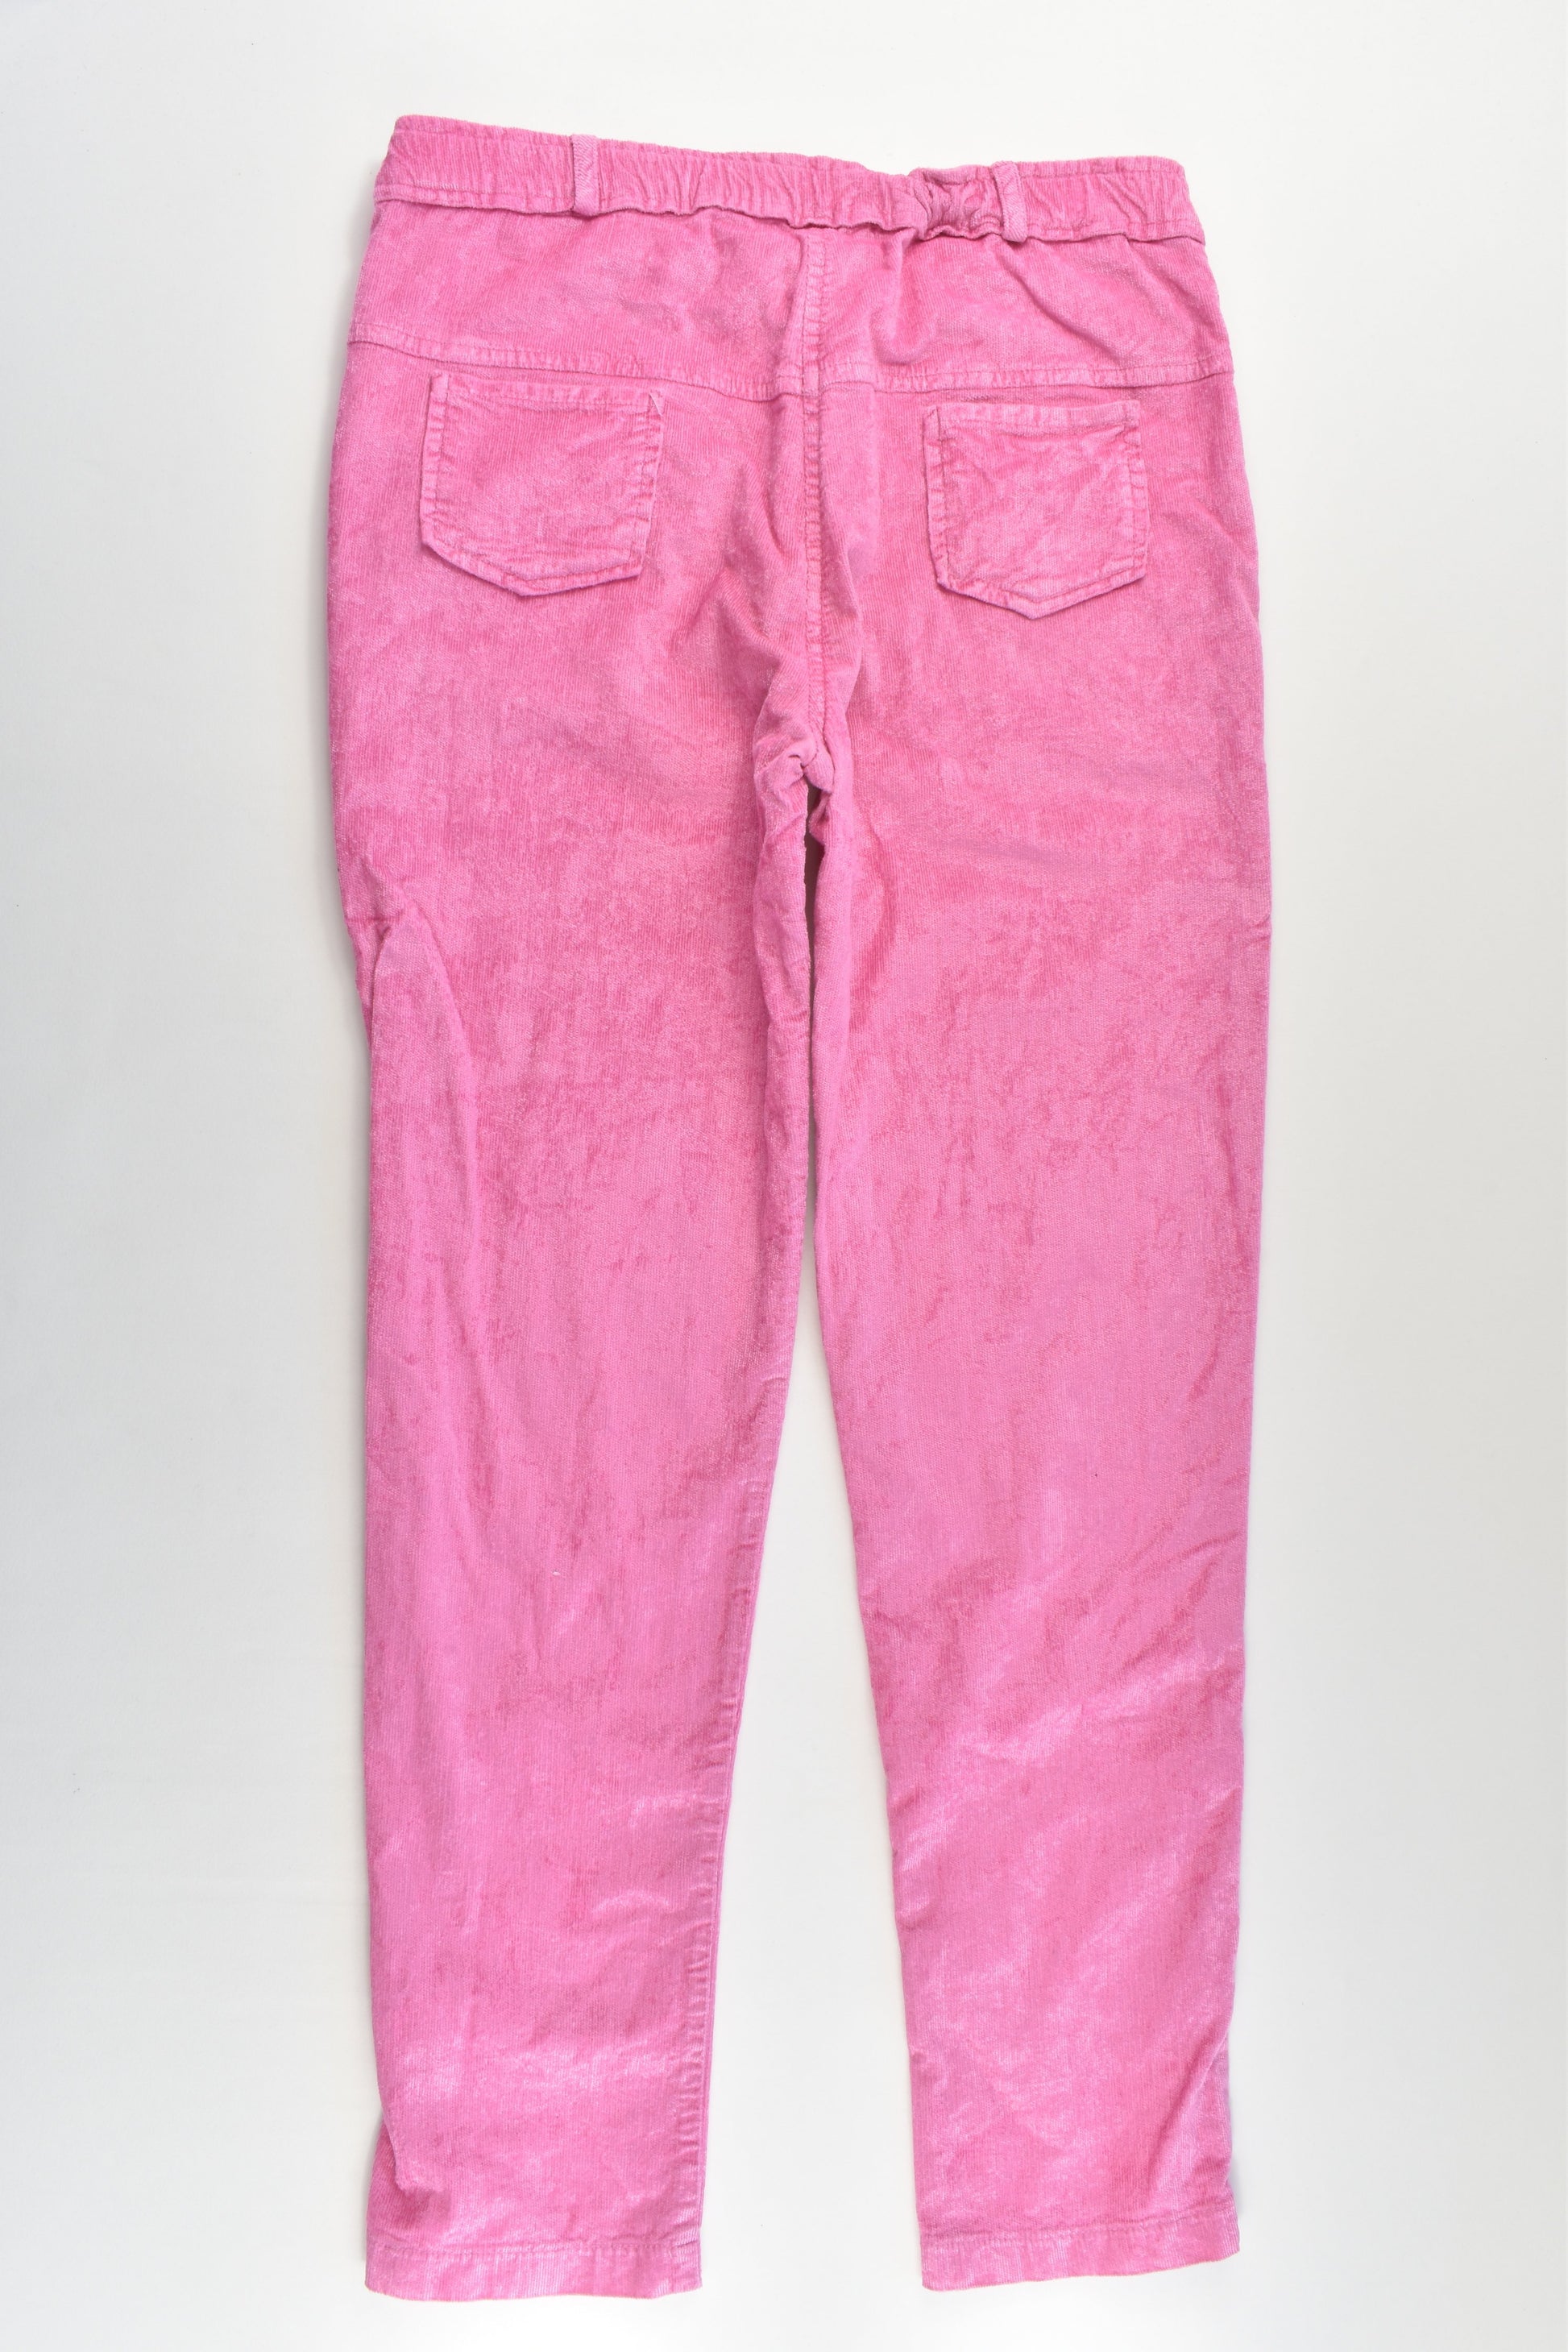 Peppermint Size 11-12 Rosy Shine Stretchy Pants